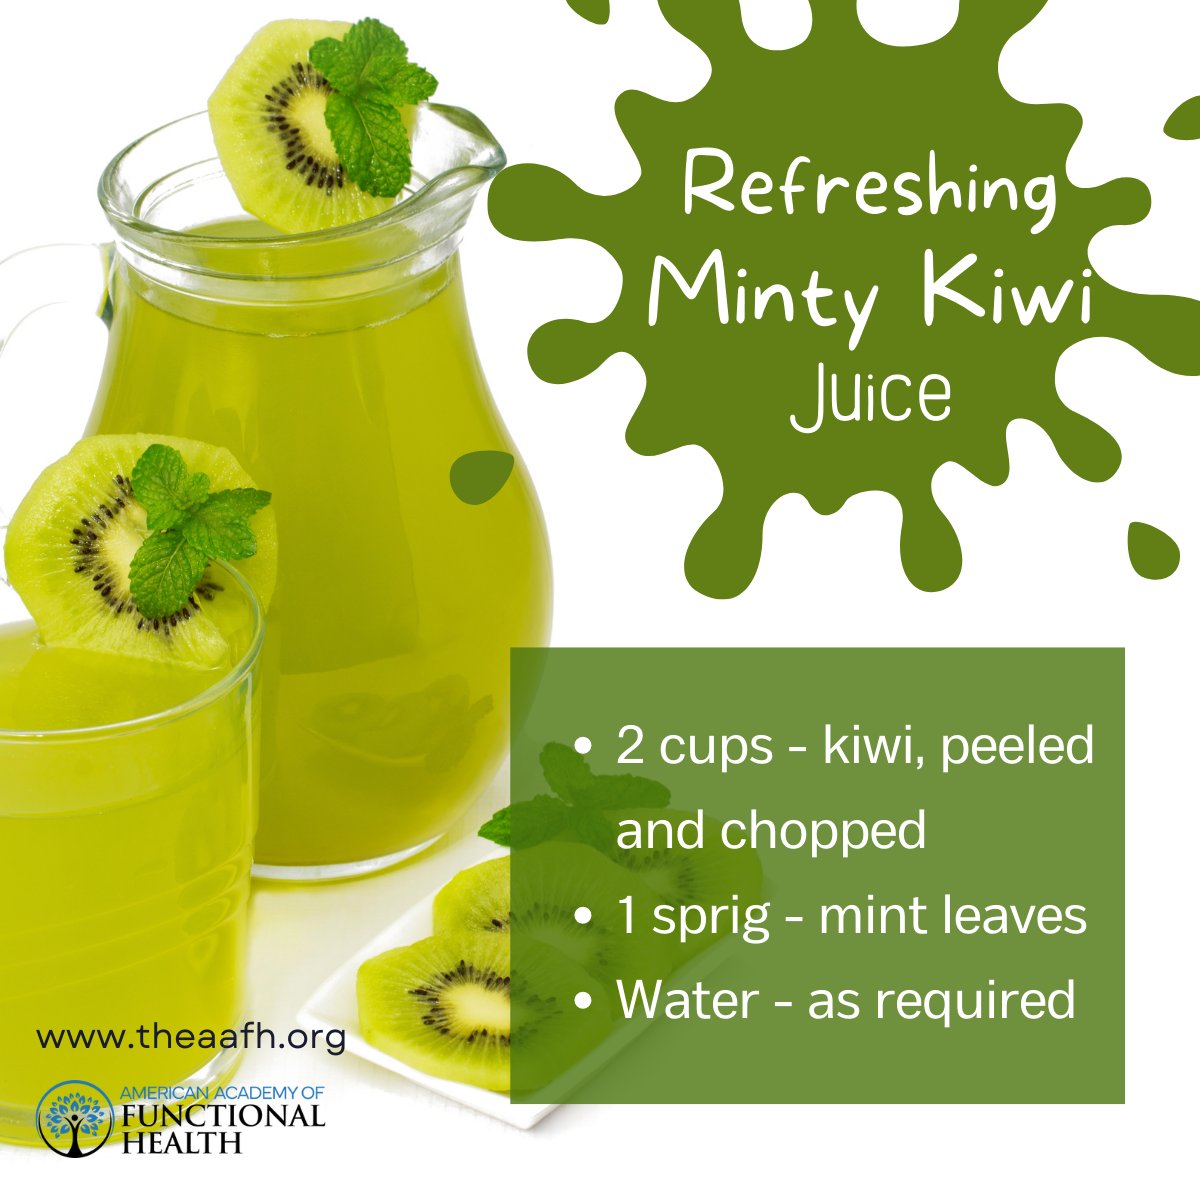 Do you need something refreshing for this hot summer? 🤔

Try this Minty Kiwi Juice, is absolutely amazing. 😍

#refreshing #mint #kiwi #kiwijuice #healthychoice #summerdrink #deliciousdrink #aafh